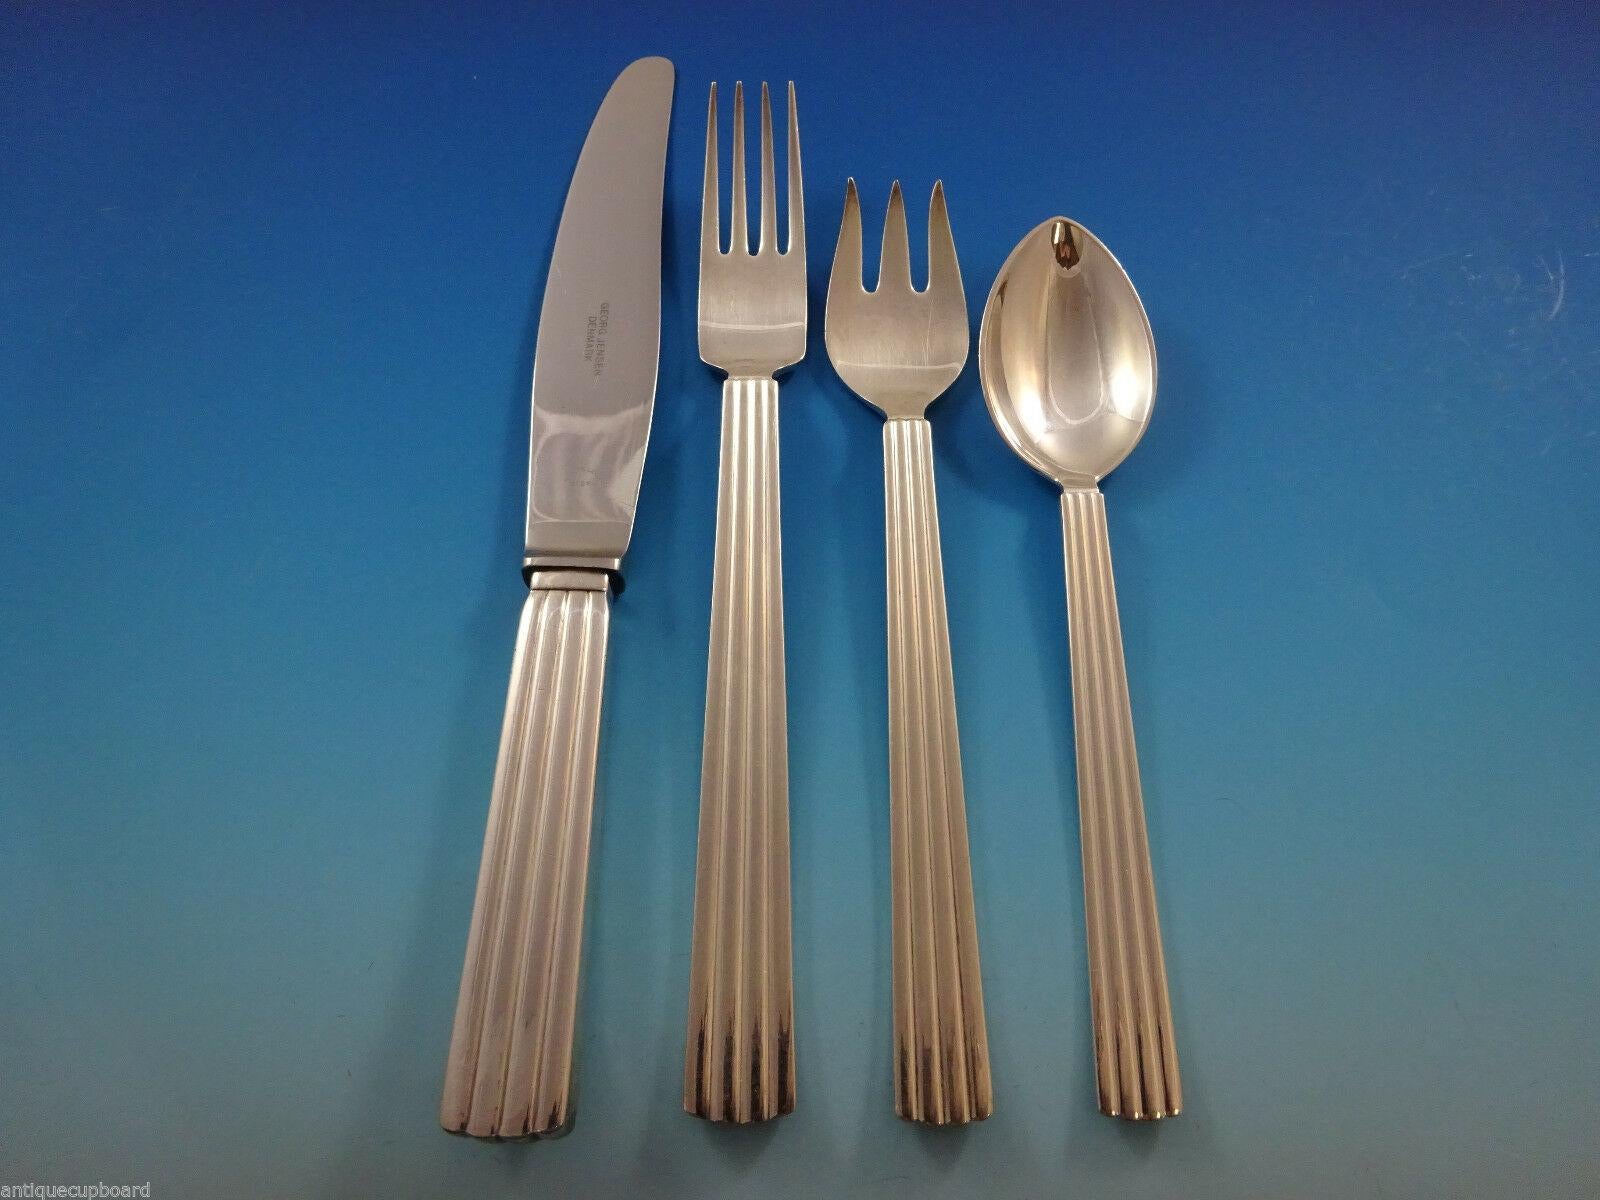 Bernadotte by George Jensen silver plated flatware set, 48 pieces. This set includes:

8 dinner knives, 8 3/4